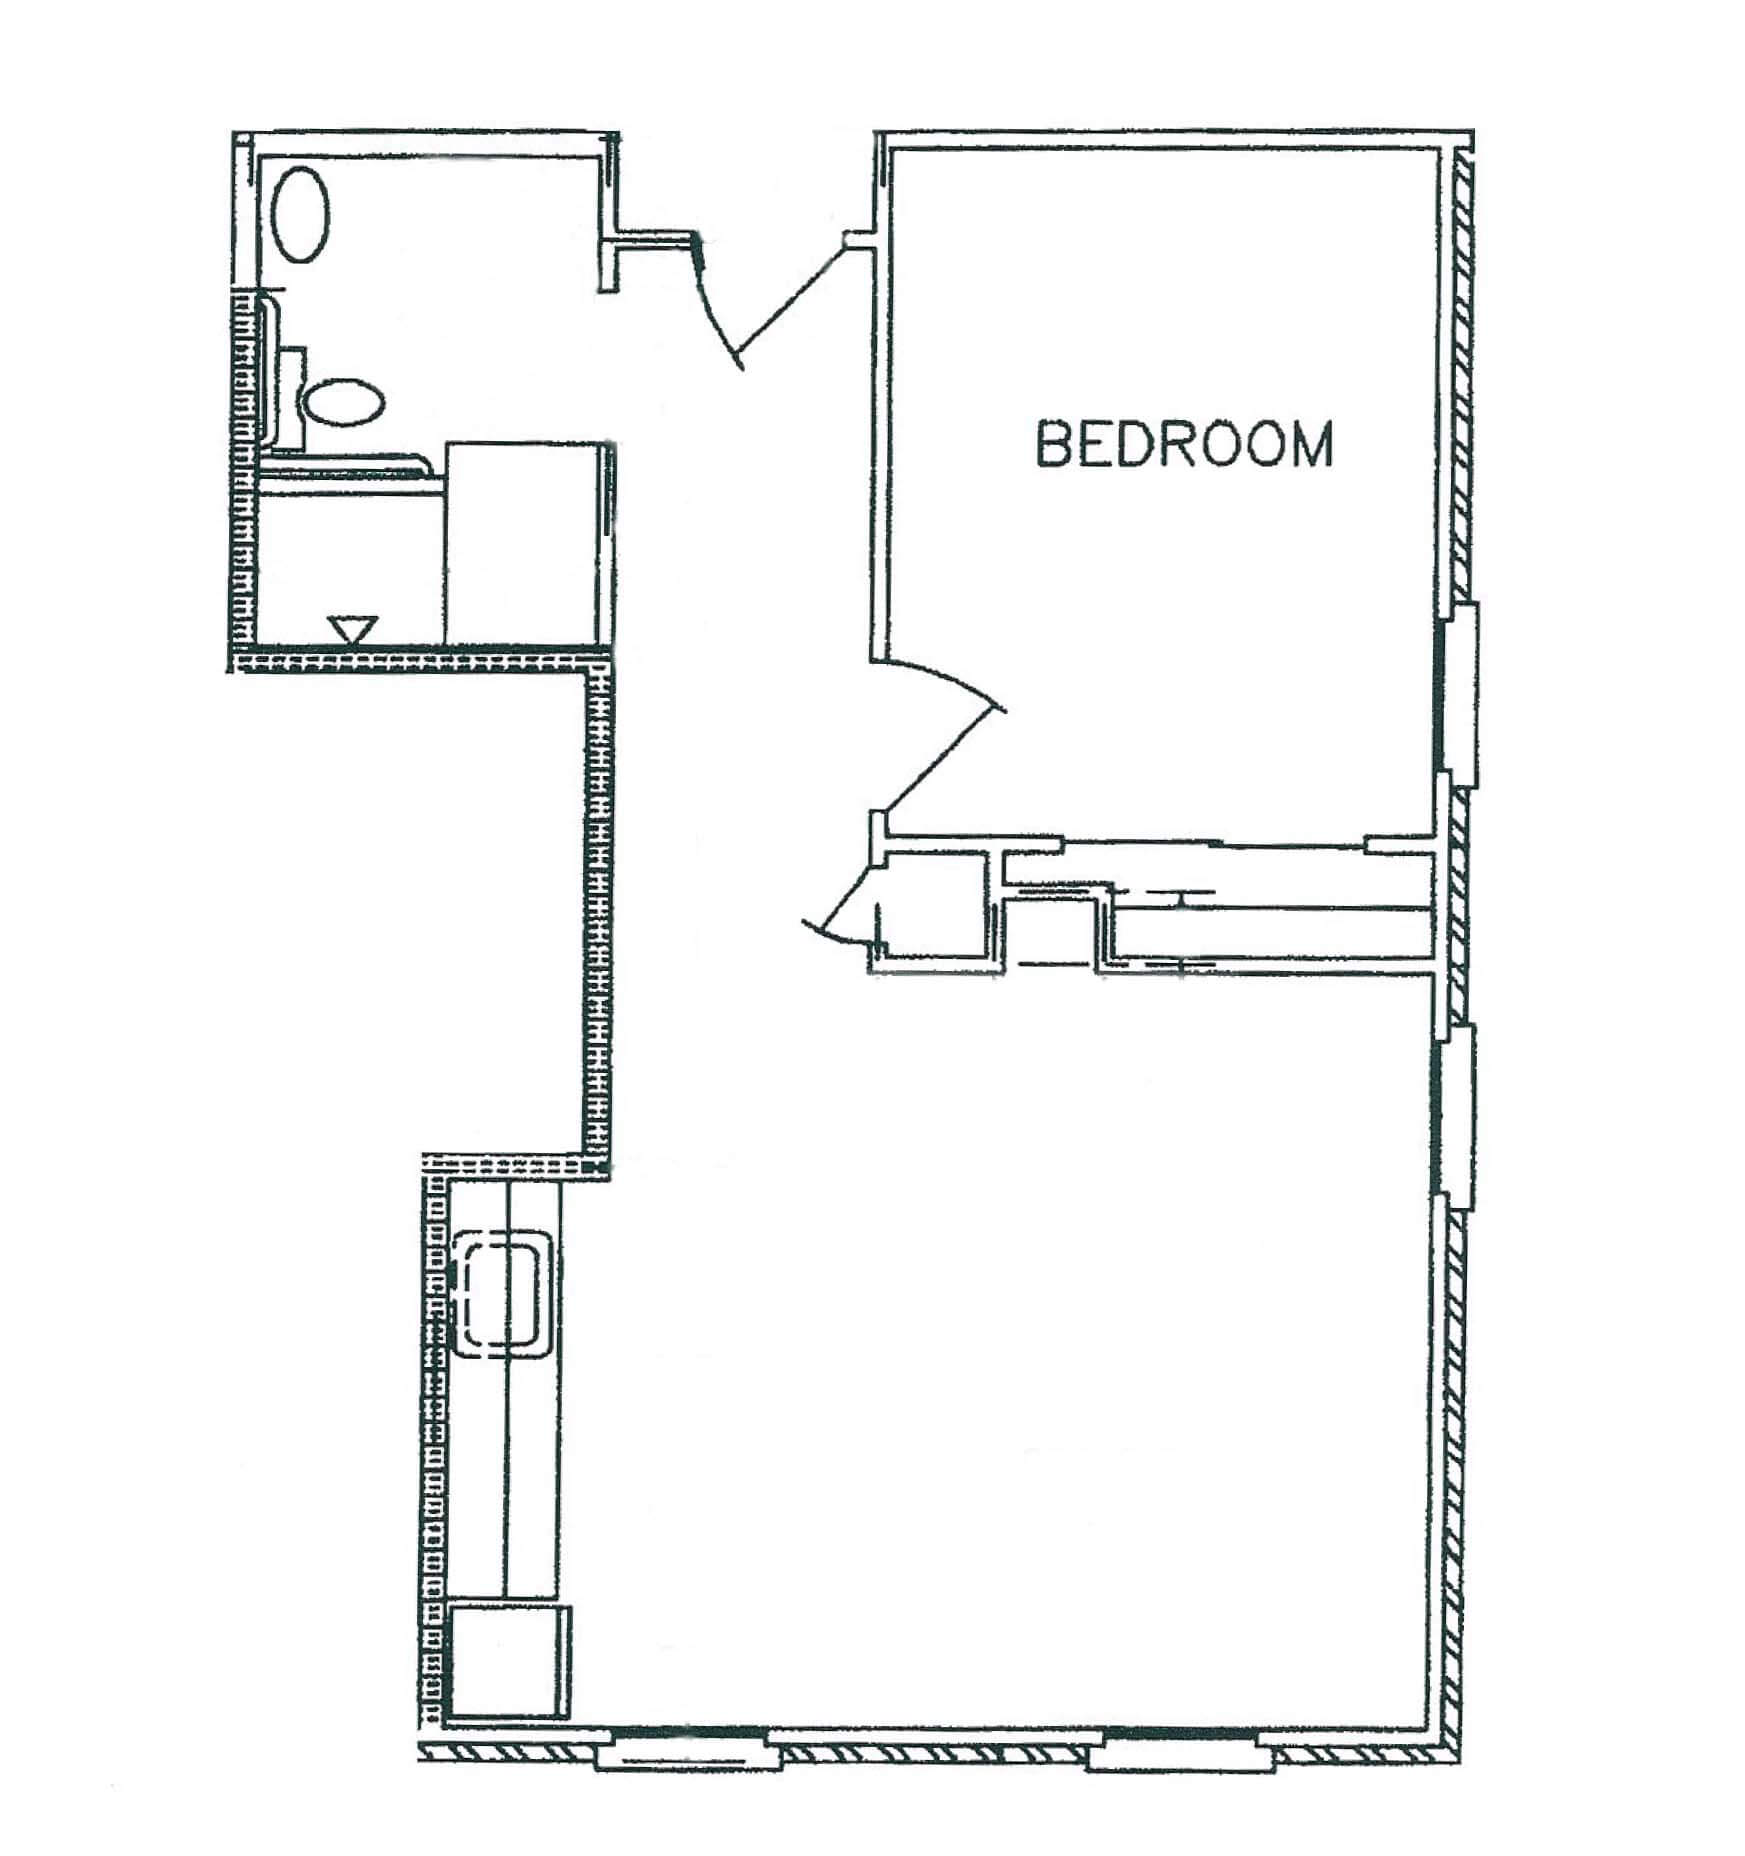 Pines Shared Suite _ One Bathroom 605 Sq. Ft.